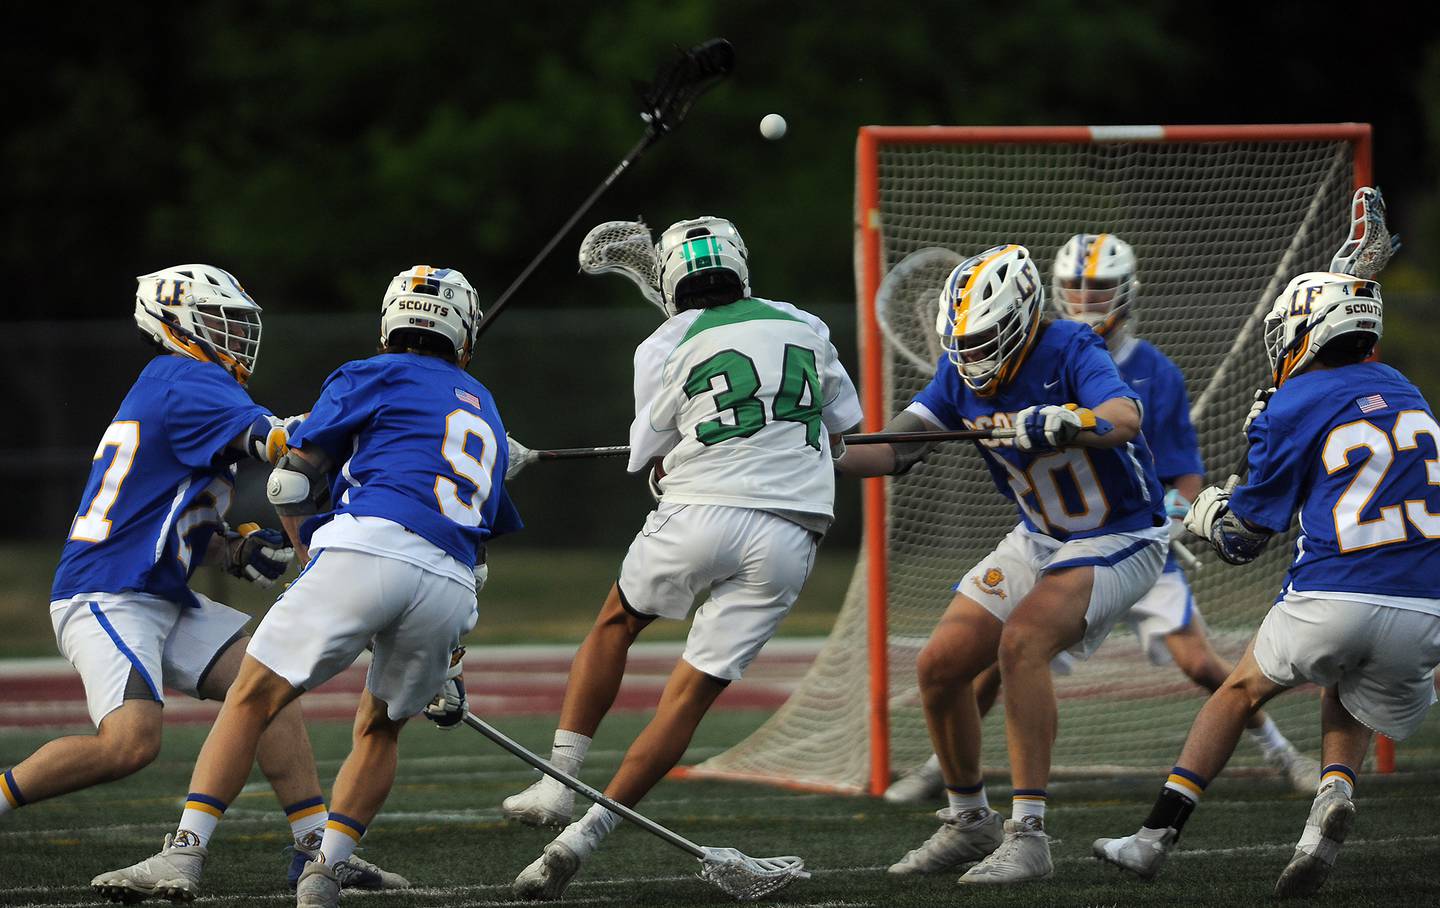 York's Charlie Toreja moves to score as Lake Forest's defense surrounds him but fails to stop his shot in the first period at the boys lacrosse state semifinals at Robert Morris University football field in Arlington Heights on Thursday